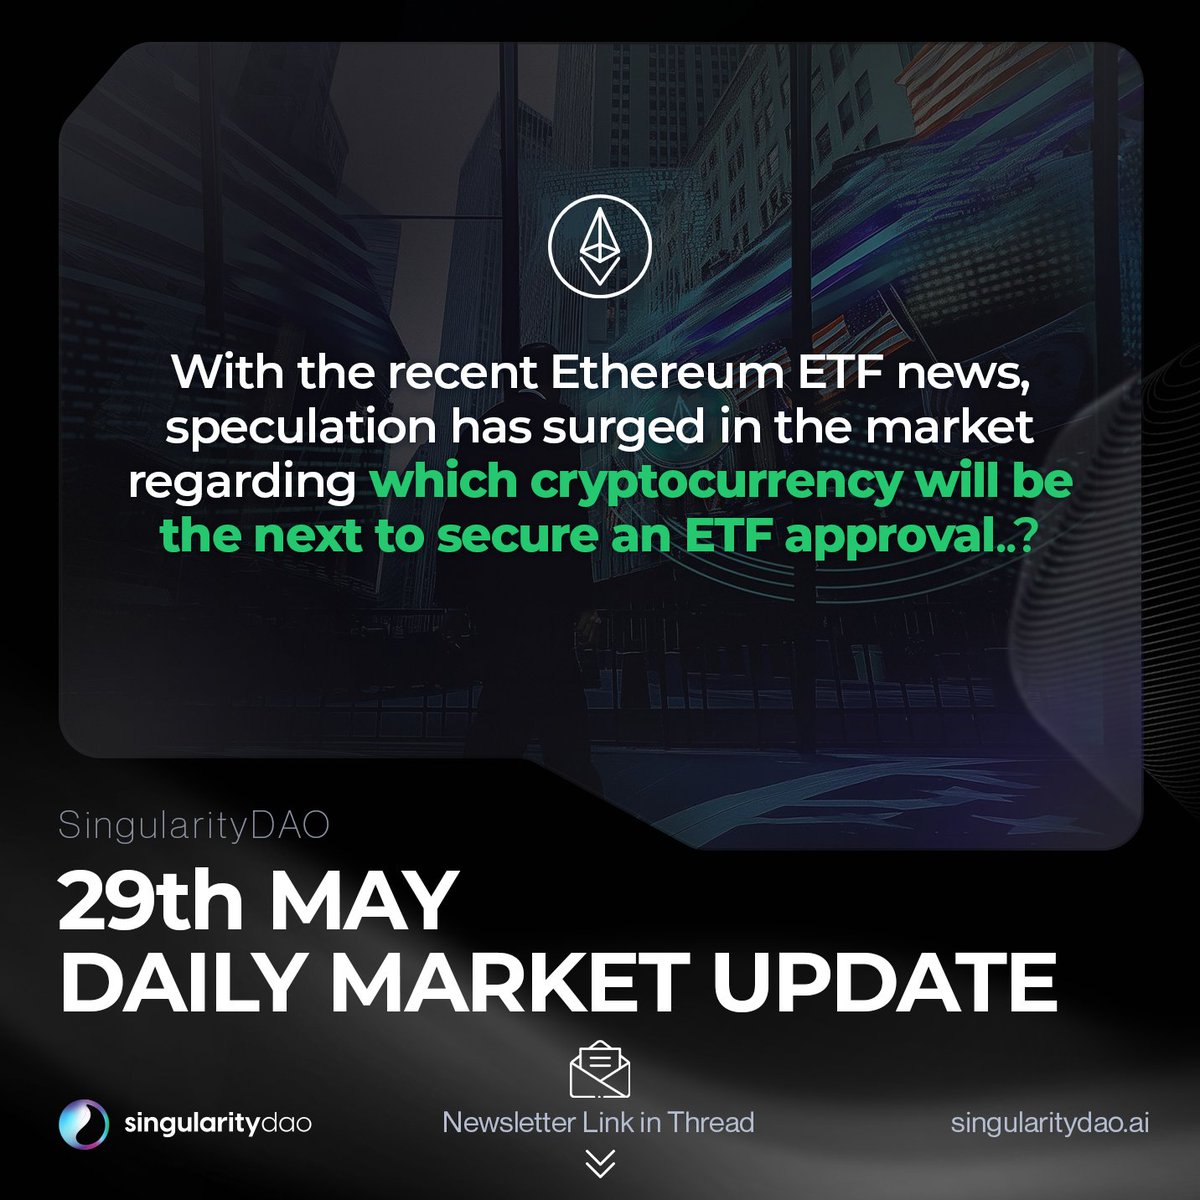 Daily Market Update - 29th May With the recent Ethereum ETF news, speculation has surged in the market regarding which cryptocurrency will be the next to secure an ETF approval..?